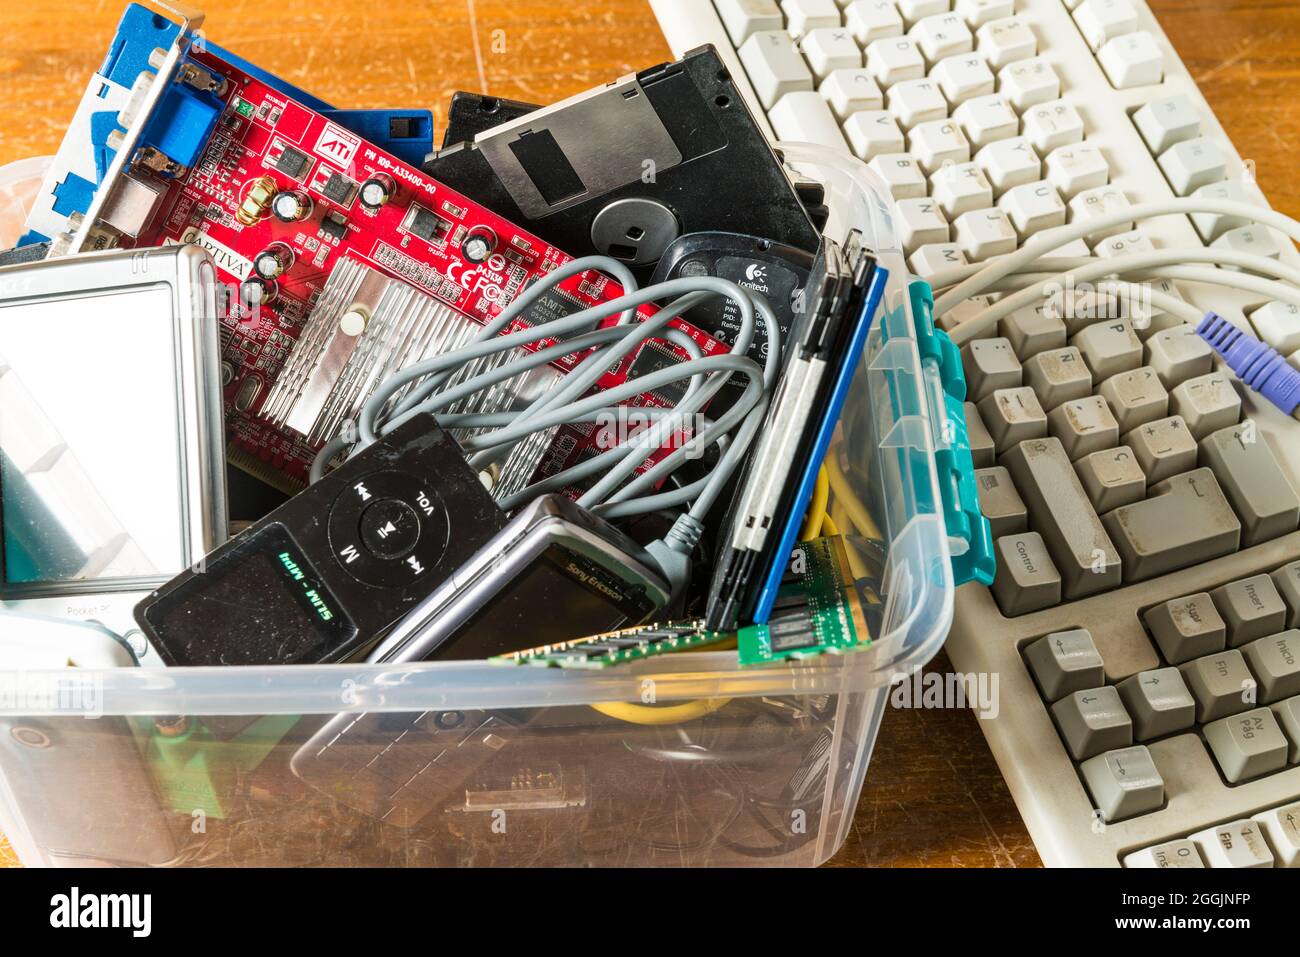 Computer keyboards and obsolete electronic and technological objects in a plastic box. Technological waste and its recycling is one of the issues to b Stock Photo